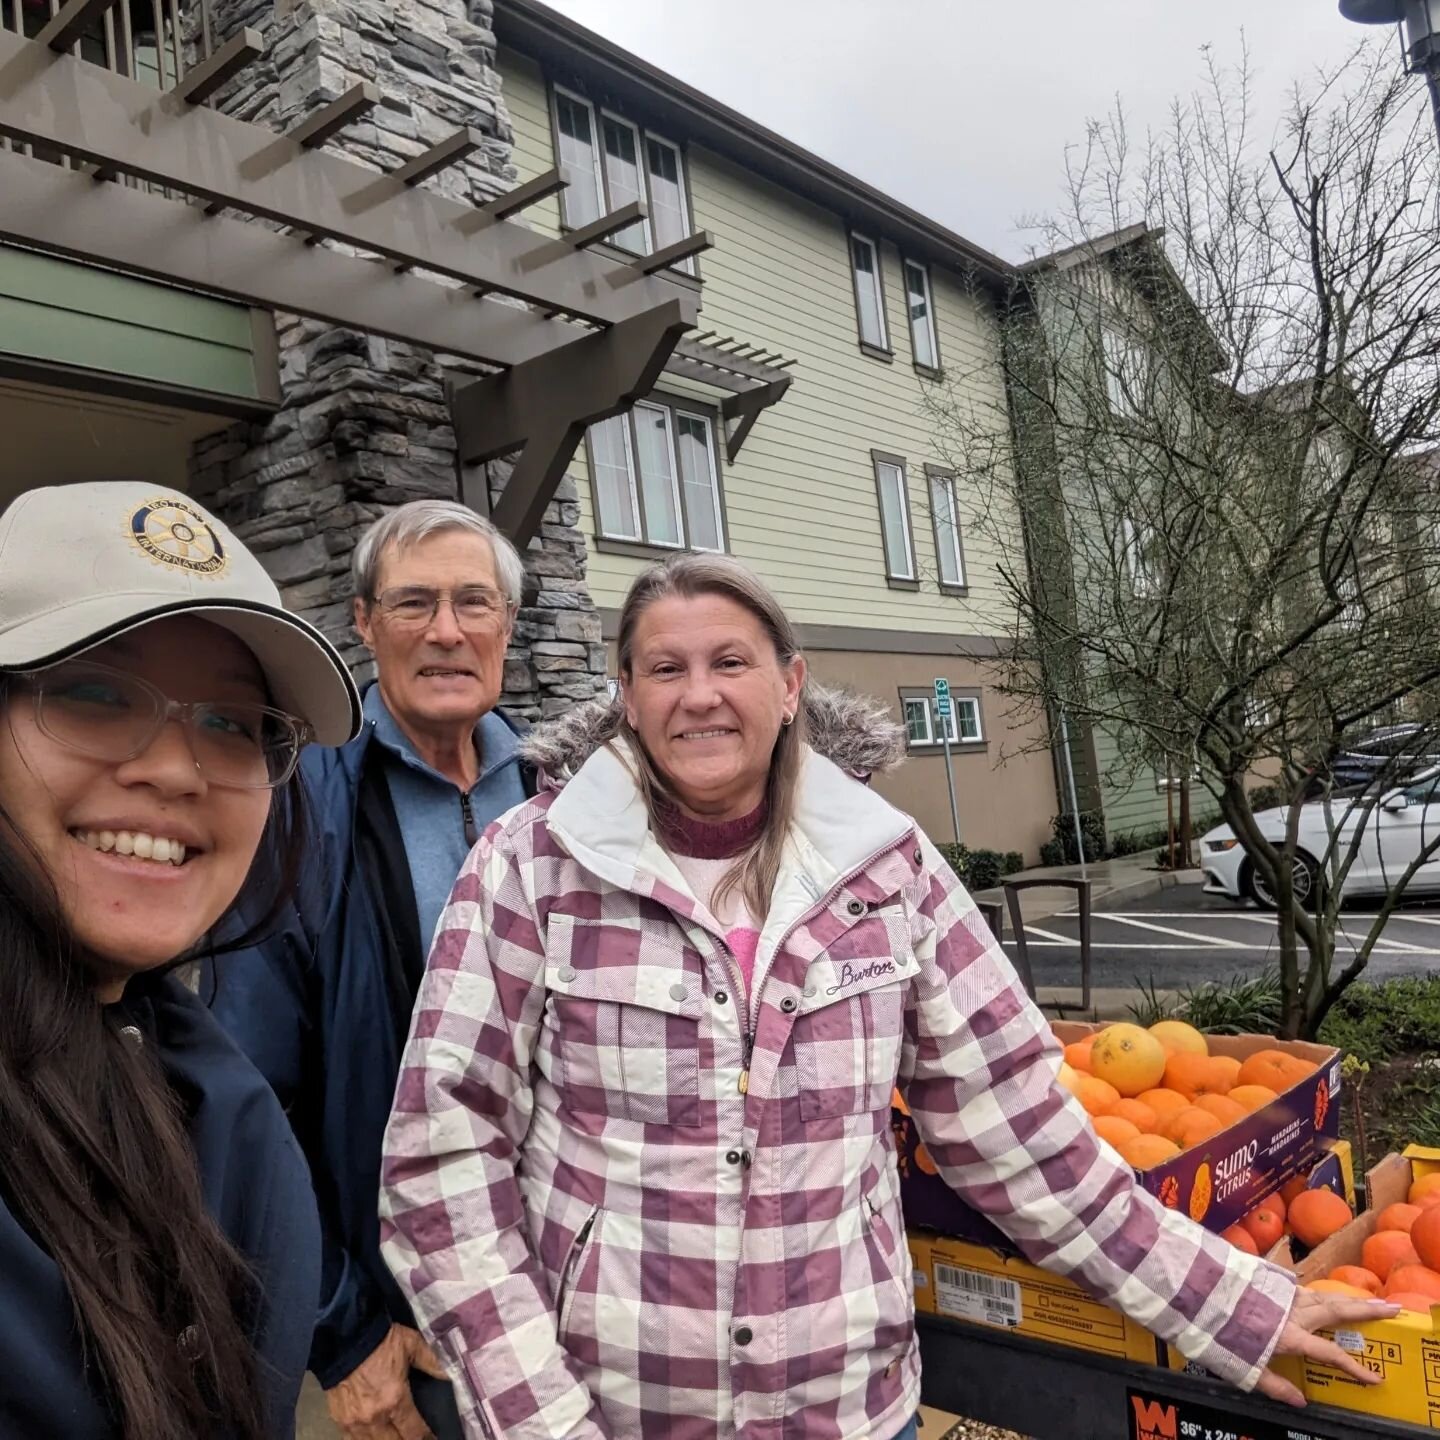 Thanks to the crew that picked oranges on Sunday, today we made our first stop at the Placentia Veteran's Village by @mercyhousing . Pictured are Jim and Stef along with Cynthia of the Veteran's Village.

The village has 50 units and veterans are cho